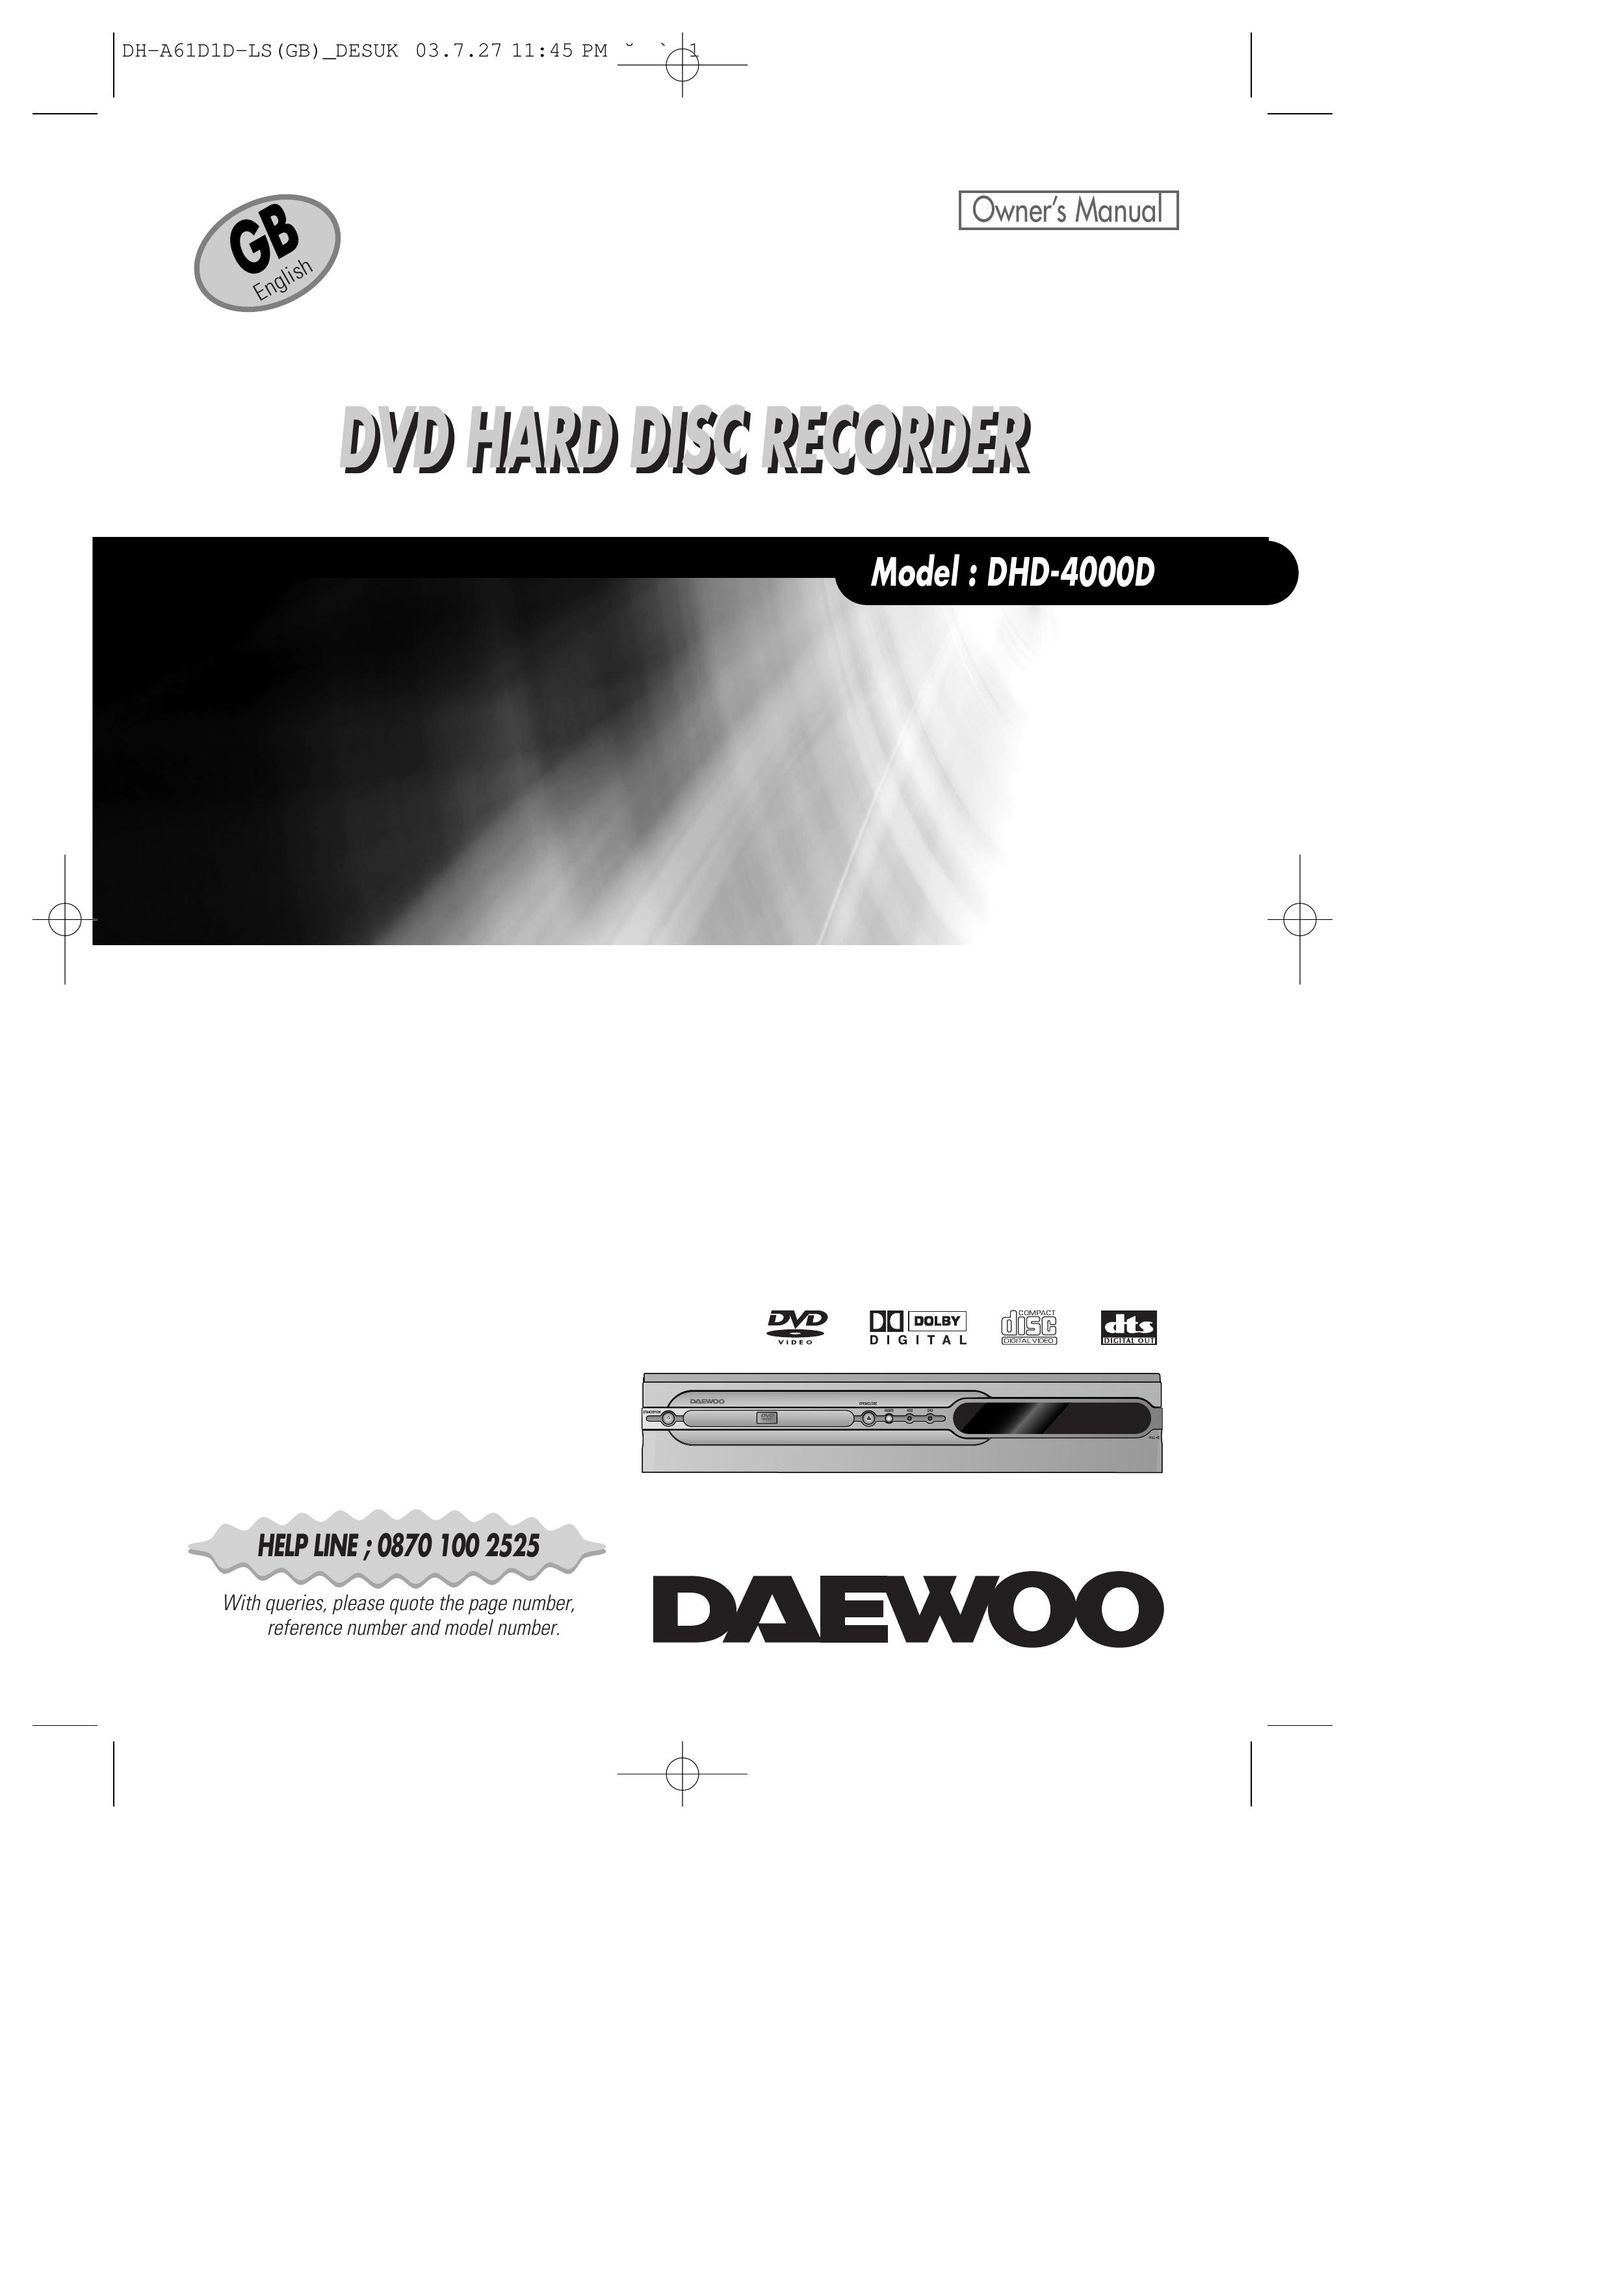 Daewoo DHD-4000D DVD Recorder User Manual (Page 1)